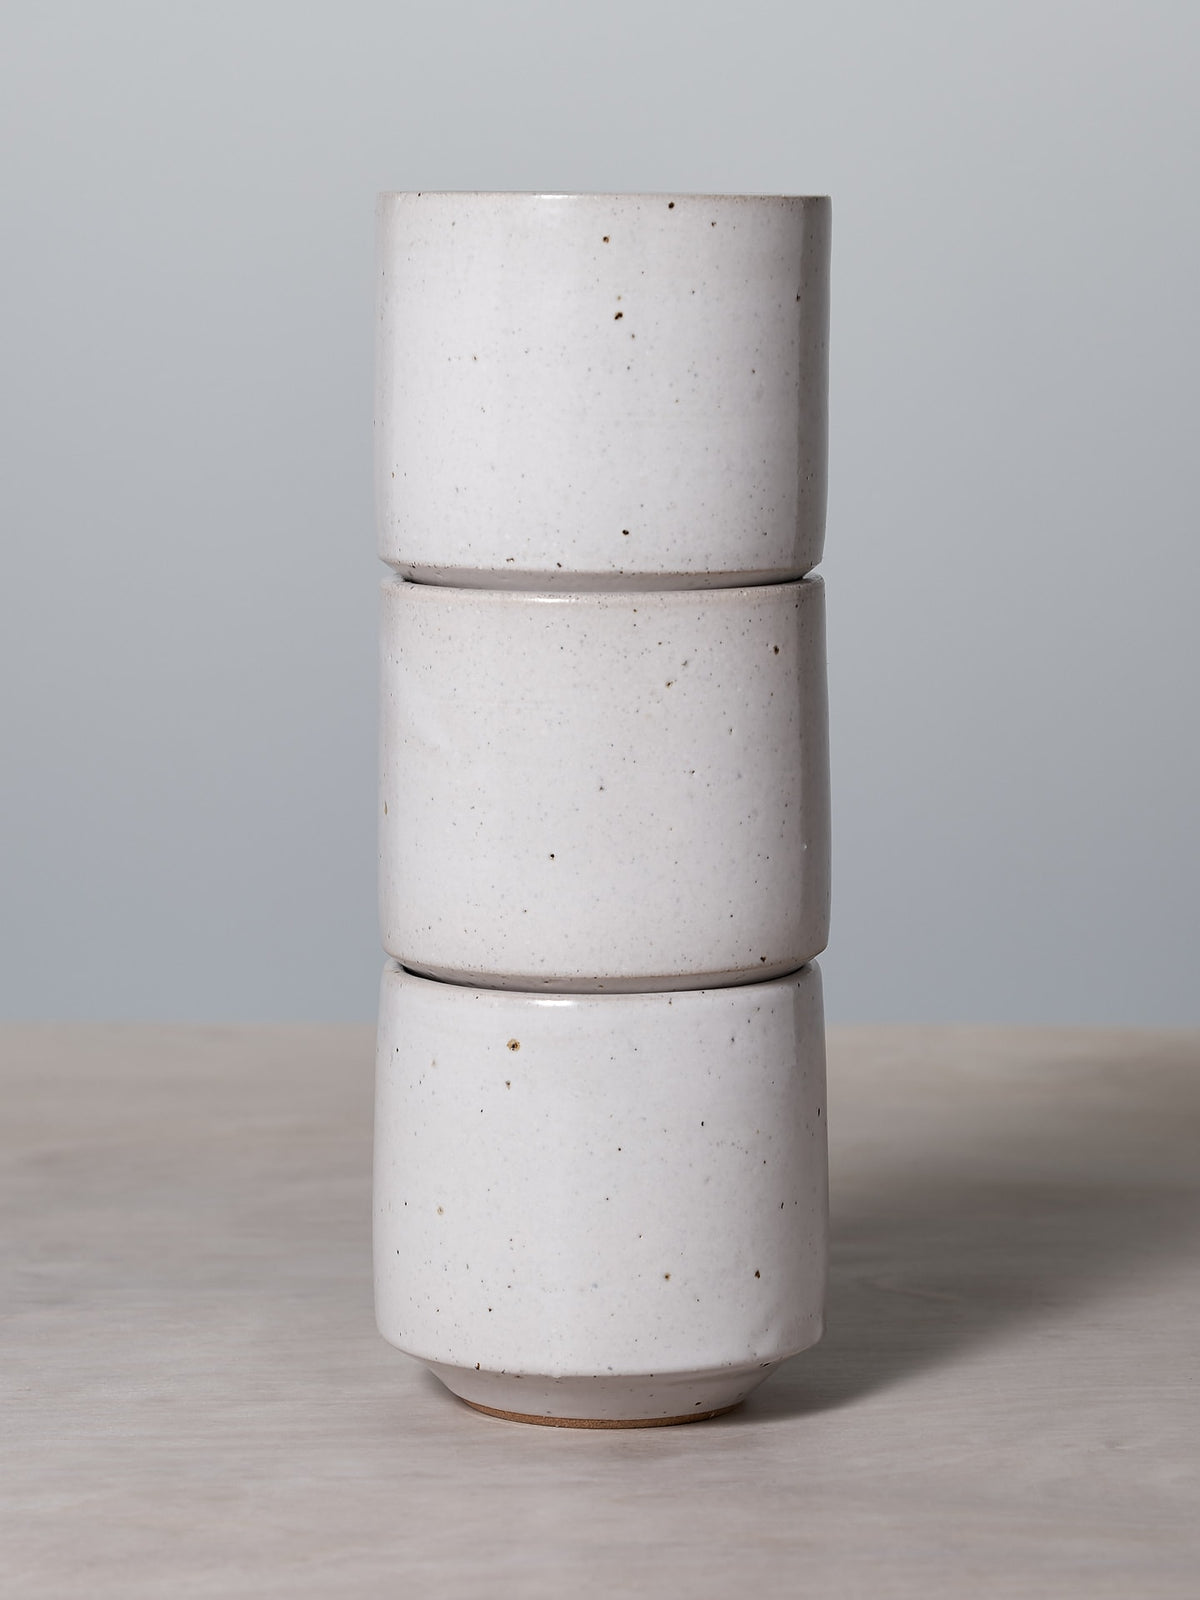 Three stacks of Richard Beauchamp Stacking Tumblers on a wooden table.